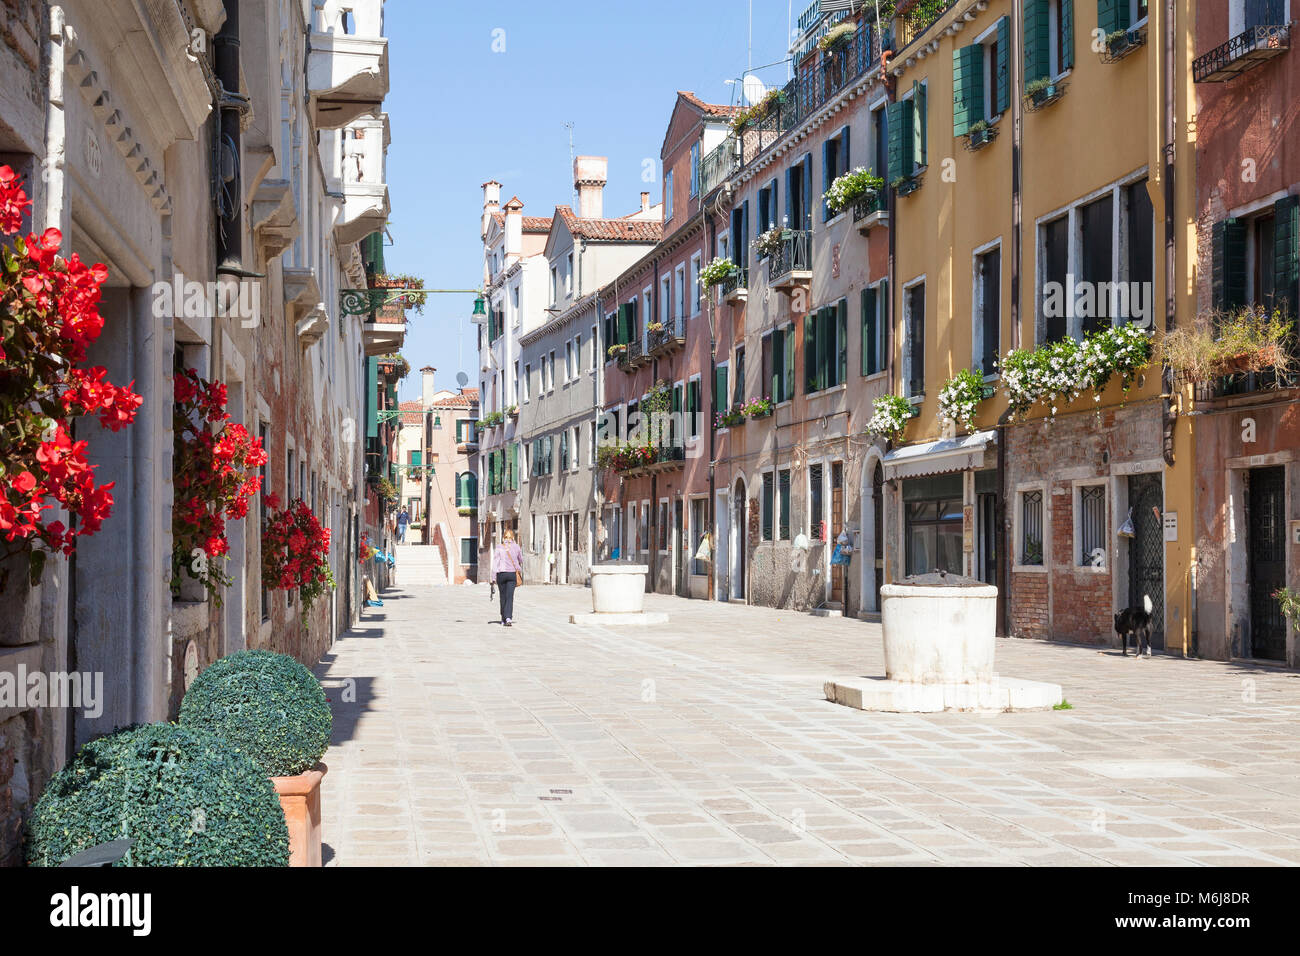 Picturesque Ruga do Pozzi, Cannaregio, Venice, Veneto, Italy named after the ancient well heads. Colourful summer flowers in window boxes. Stock Photo